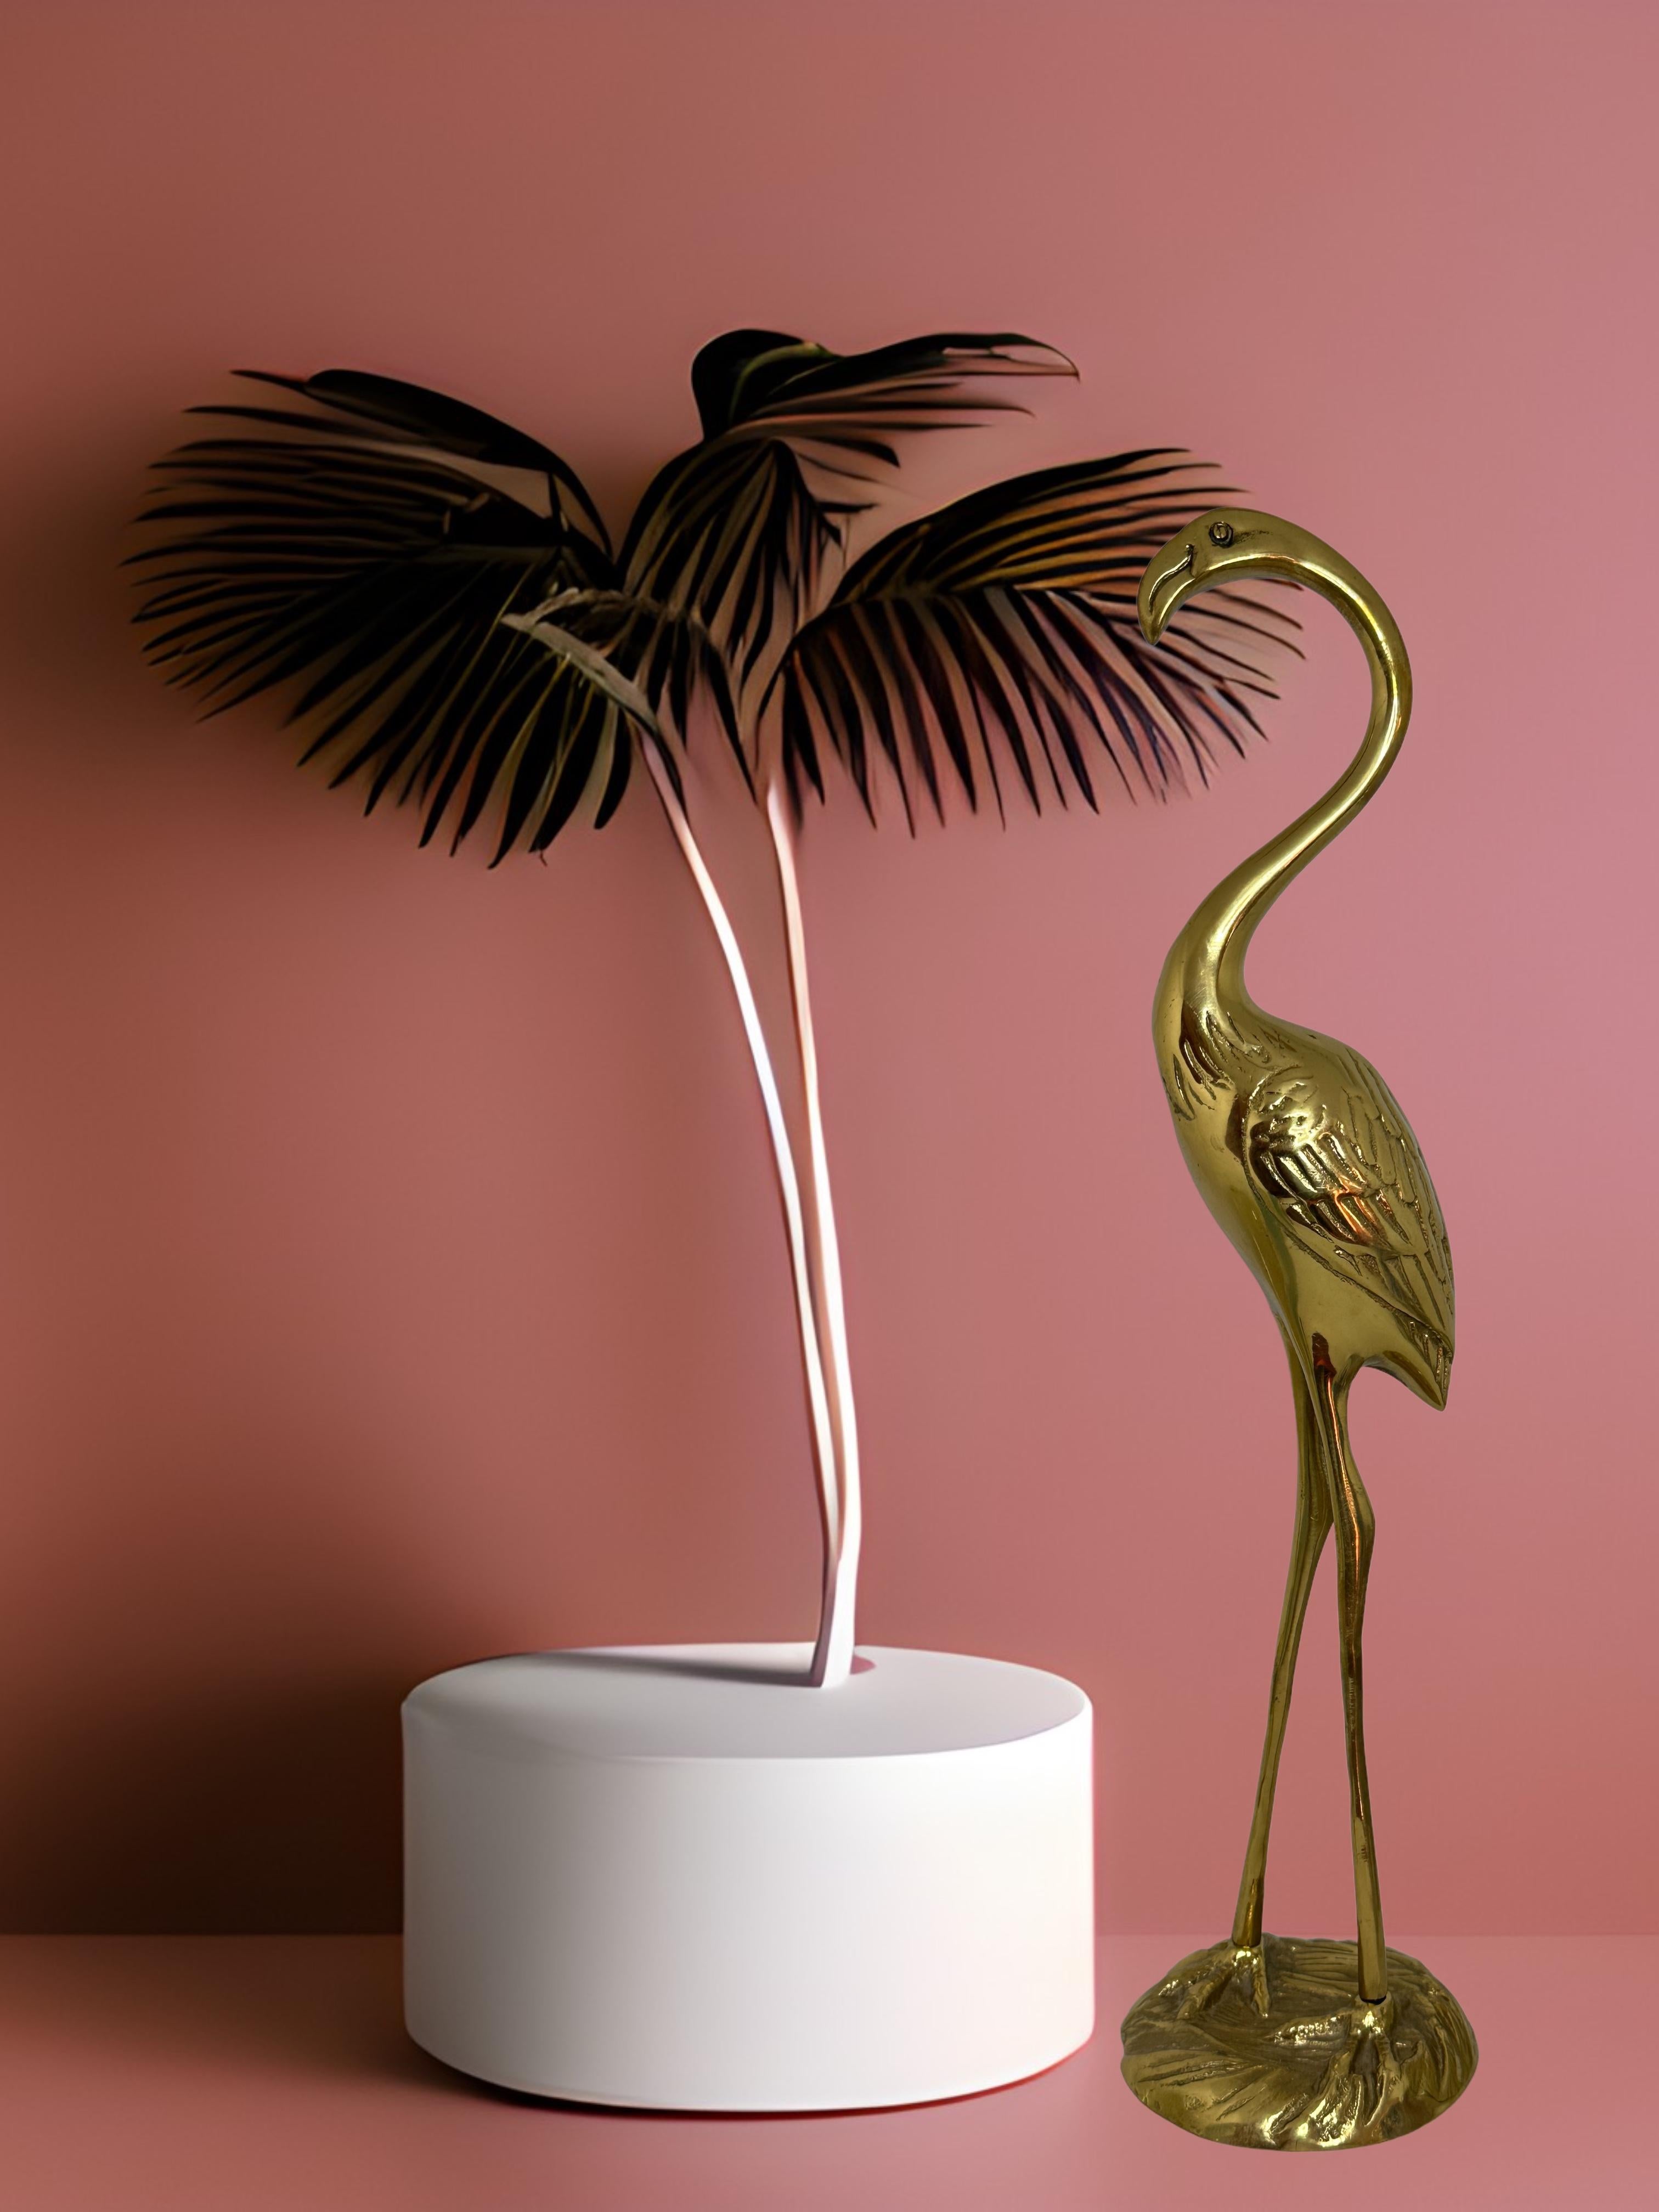 A beautiful vintage brass flamingo statue. This decorative item would make a beautiful addition to any room. Made in the 1960s it displays the joy of that great era with a bold, yet classy statement.